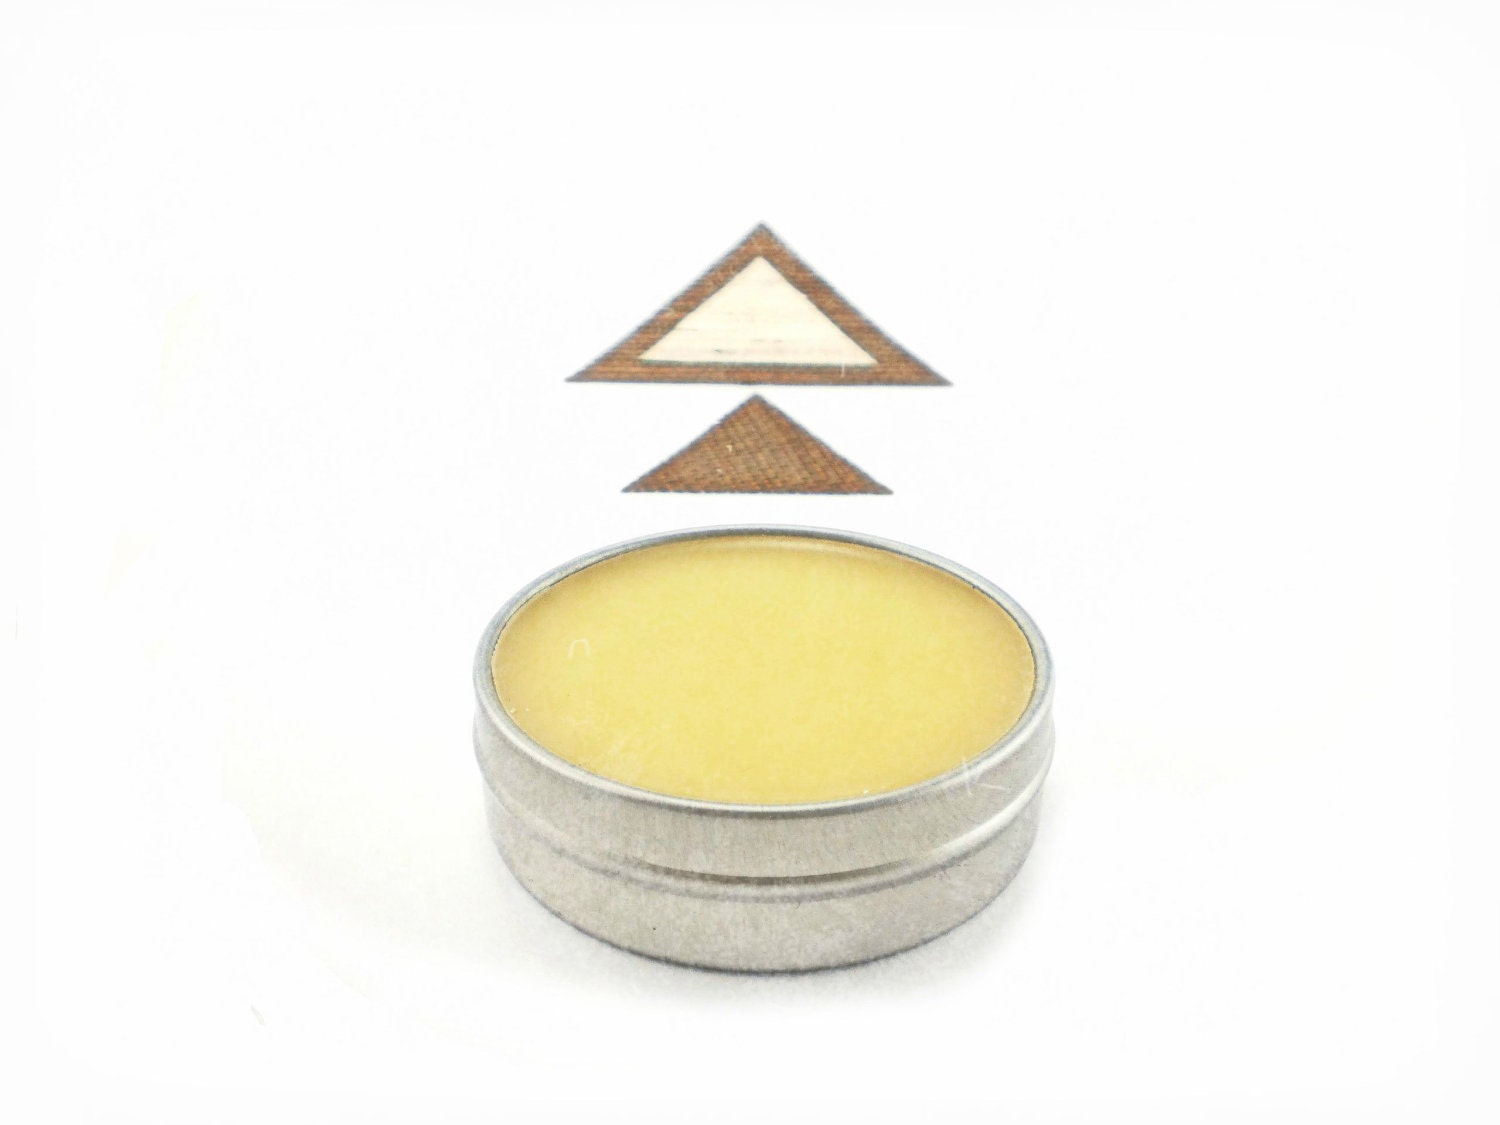 All Natural Lip Balm with Local Honey, Beeswax and Essential Oils geometric desert mustard sun southwestern bohemian boho - WinsomeGreen